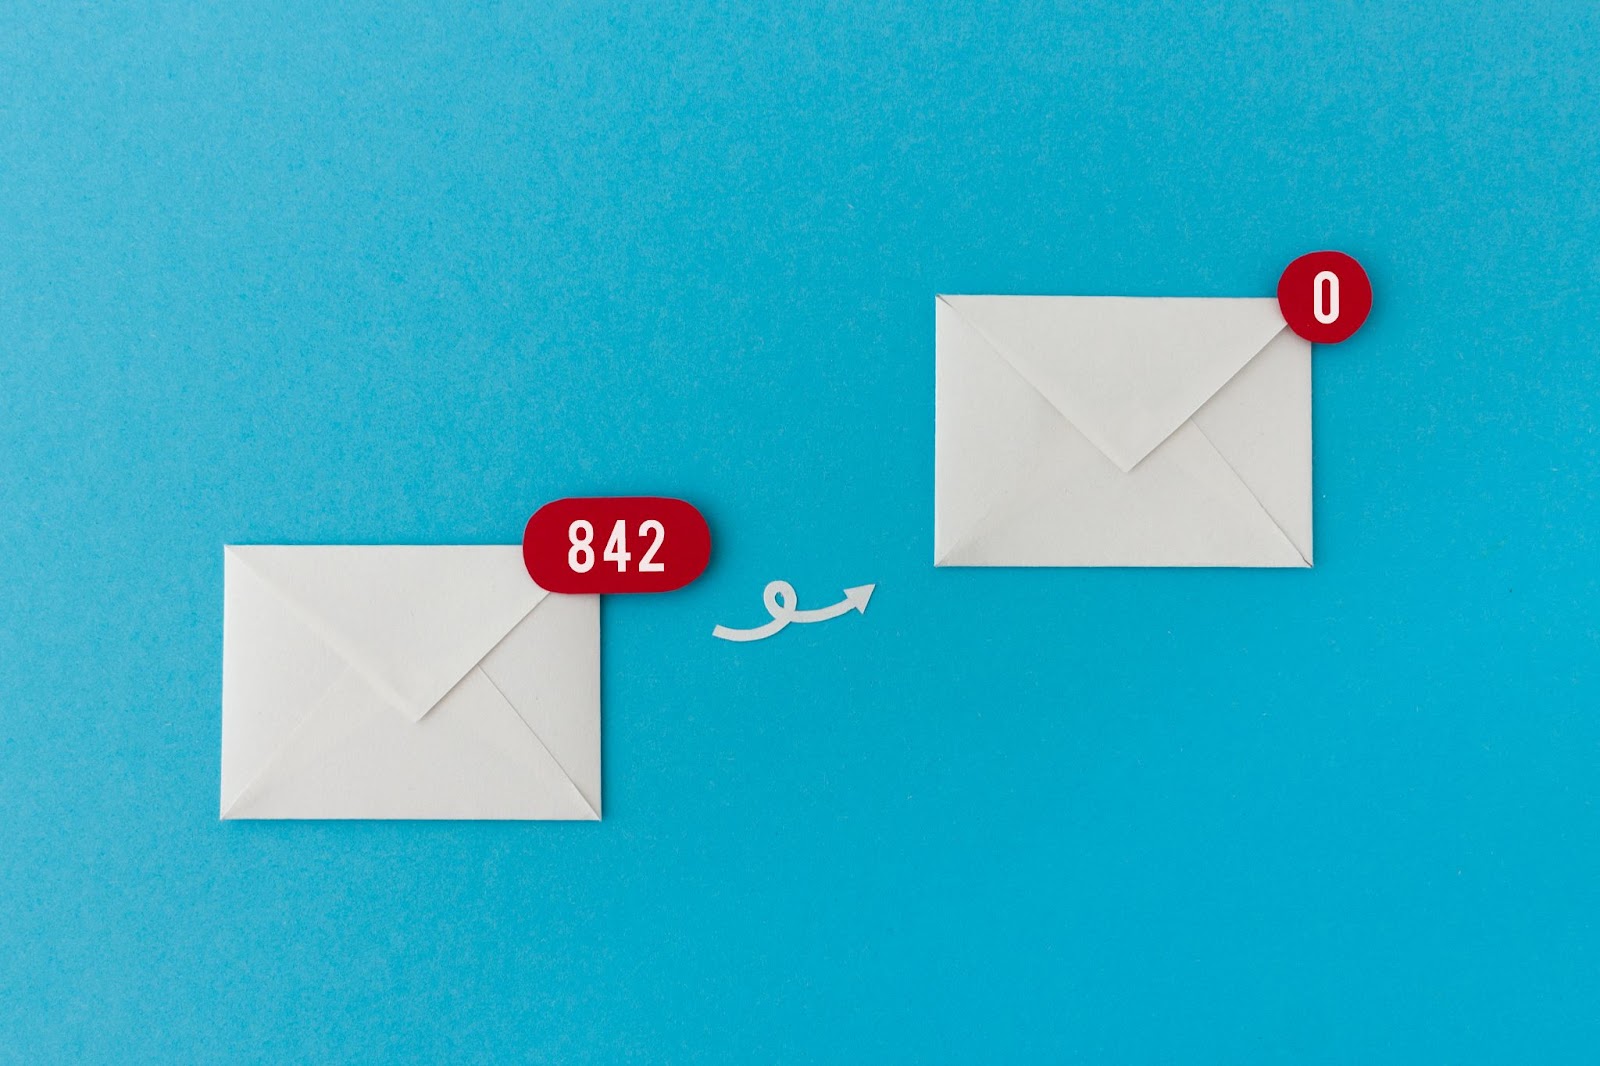 Reducing the number of unread email messages from 842 to zero 